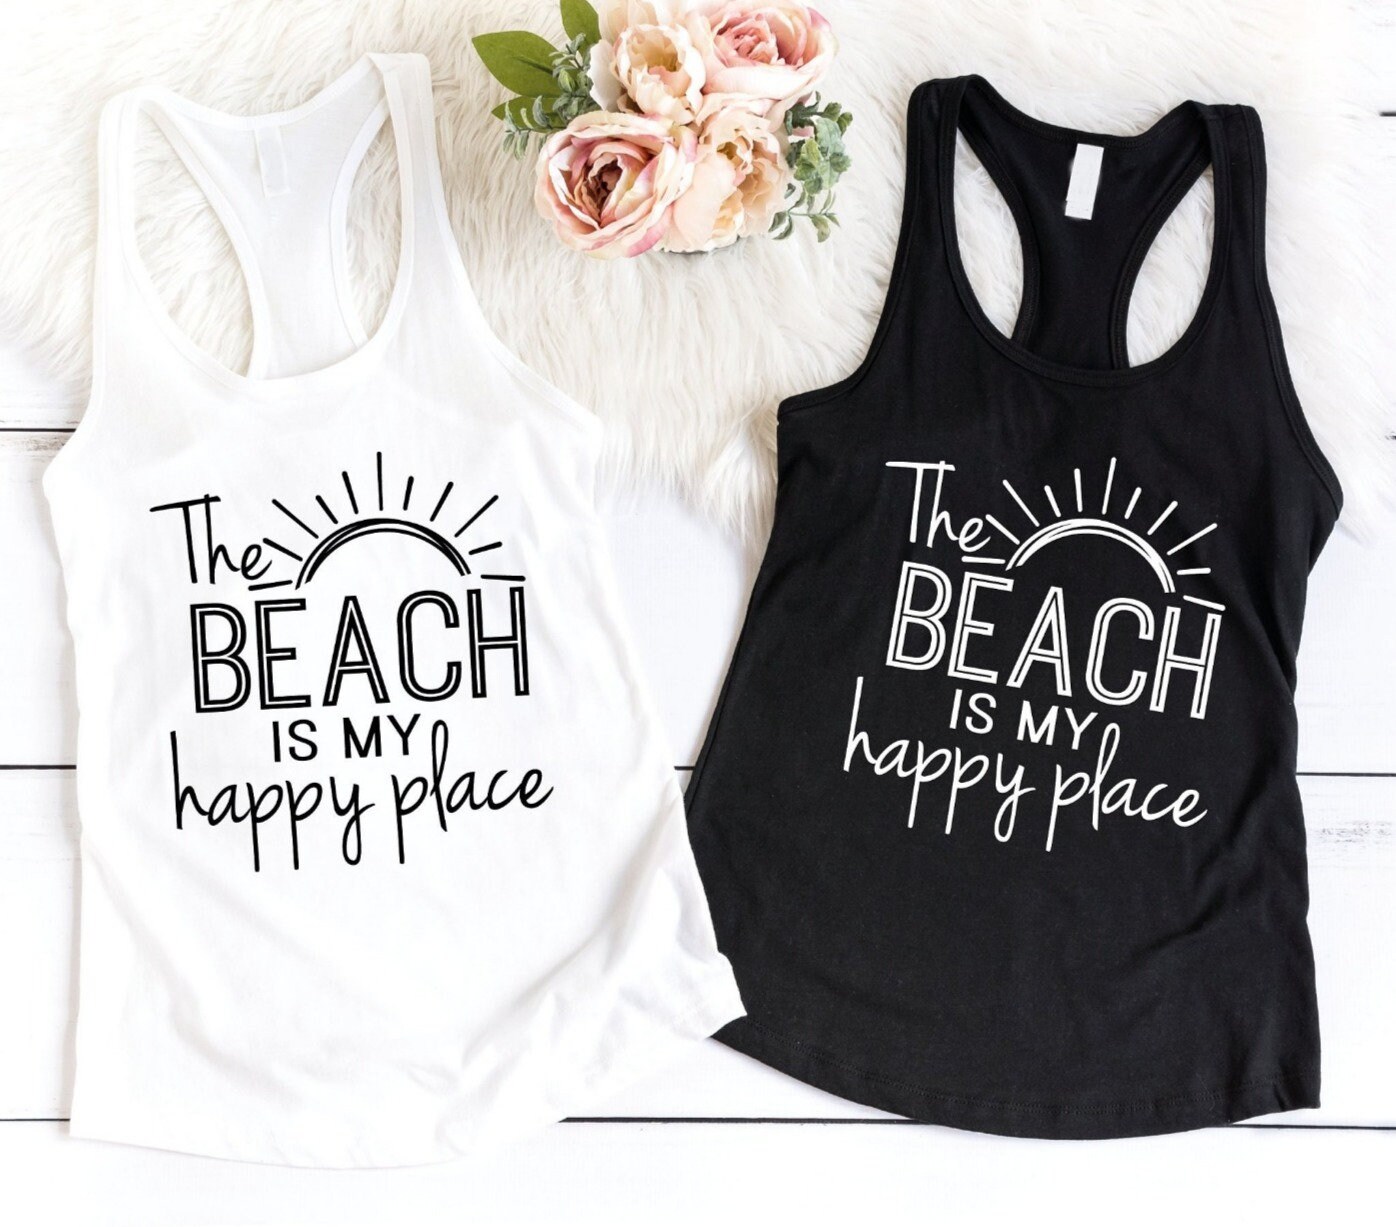 Outfits For A Girls' Trip - MY HAPPY PLACE